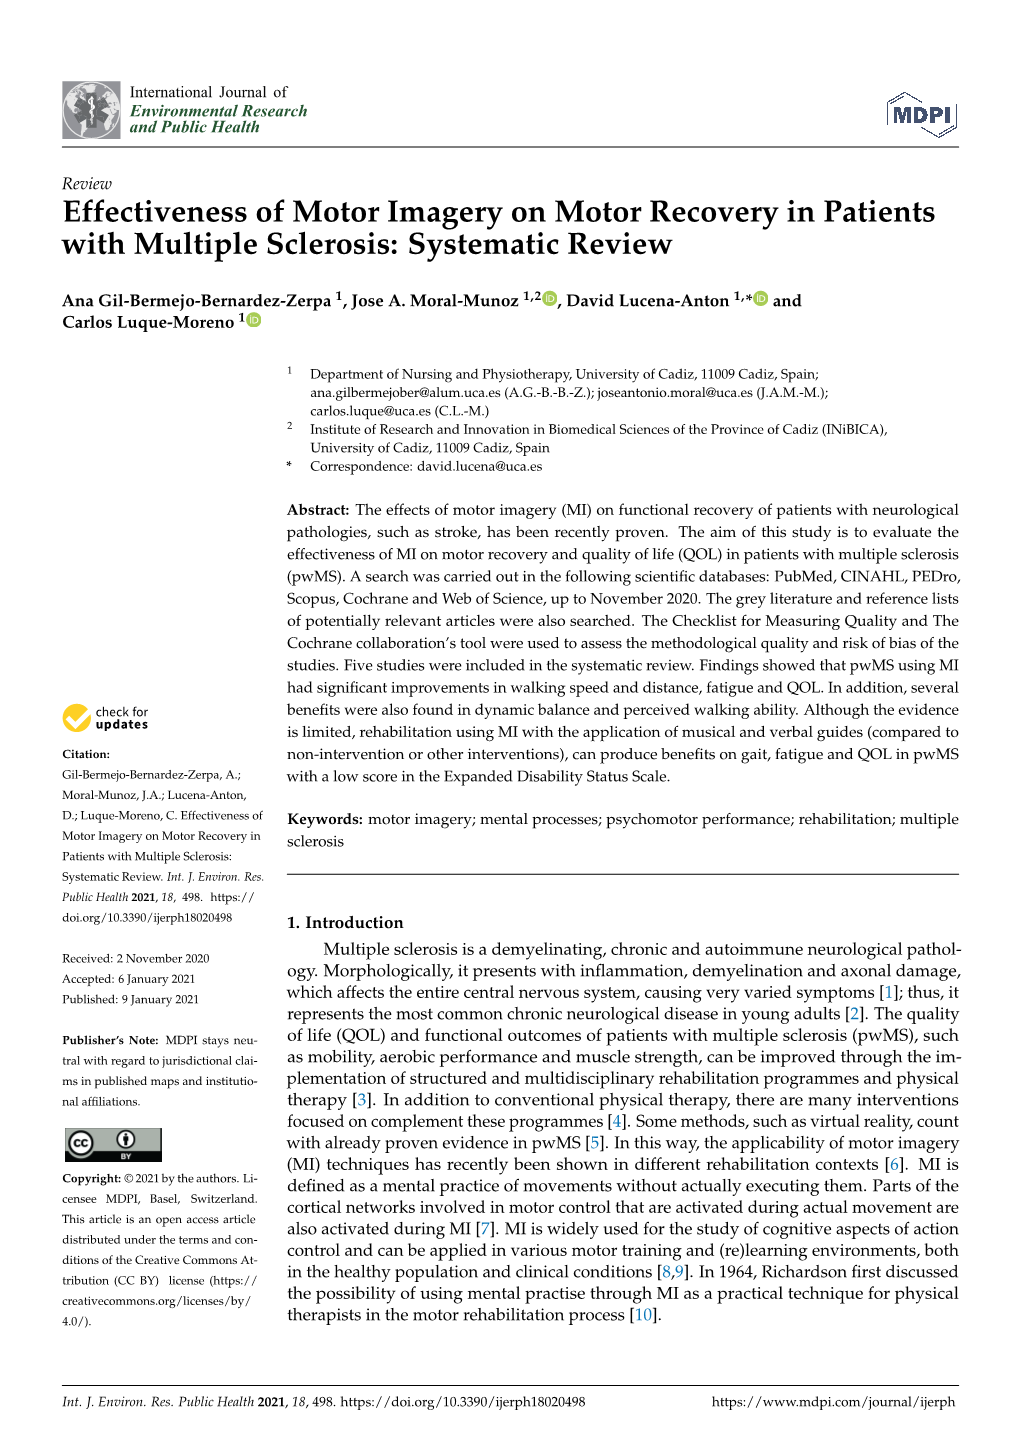 Effectiveness of Motor Imagery on Motor Recovery in Patients with Multiple Sclerosis: Systematic Review